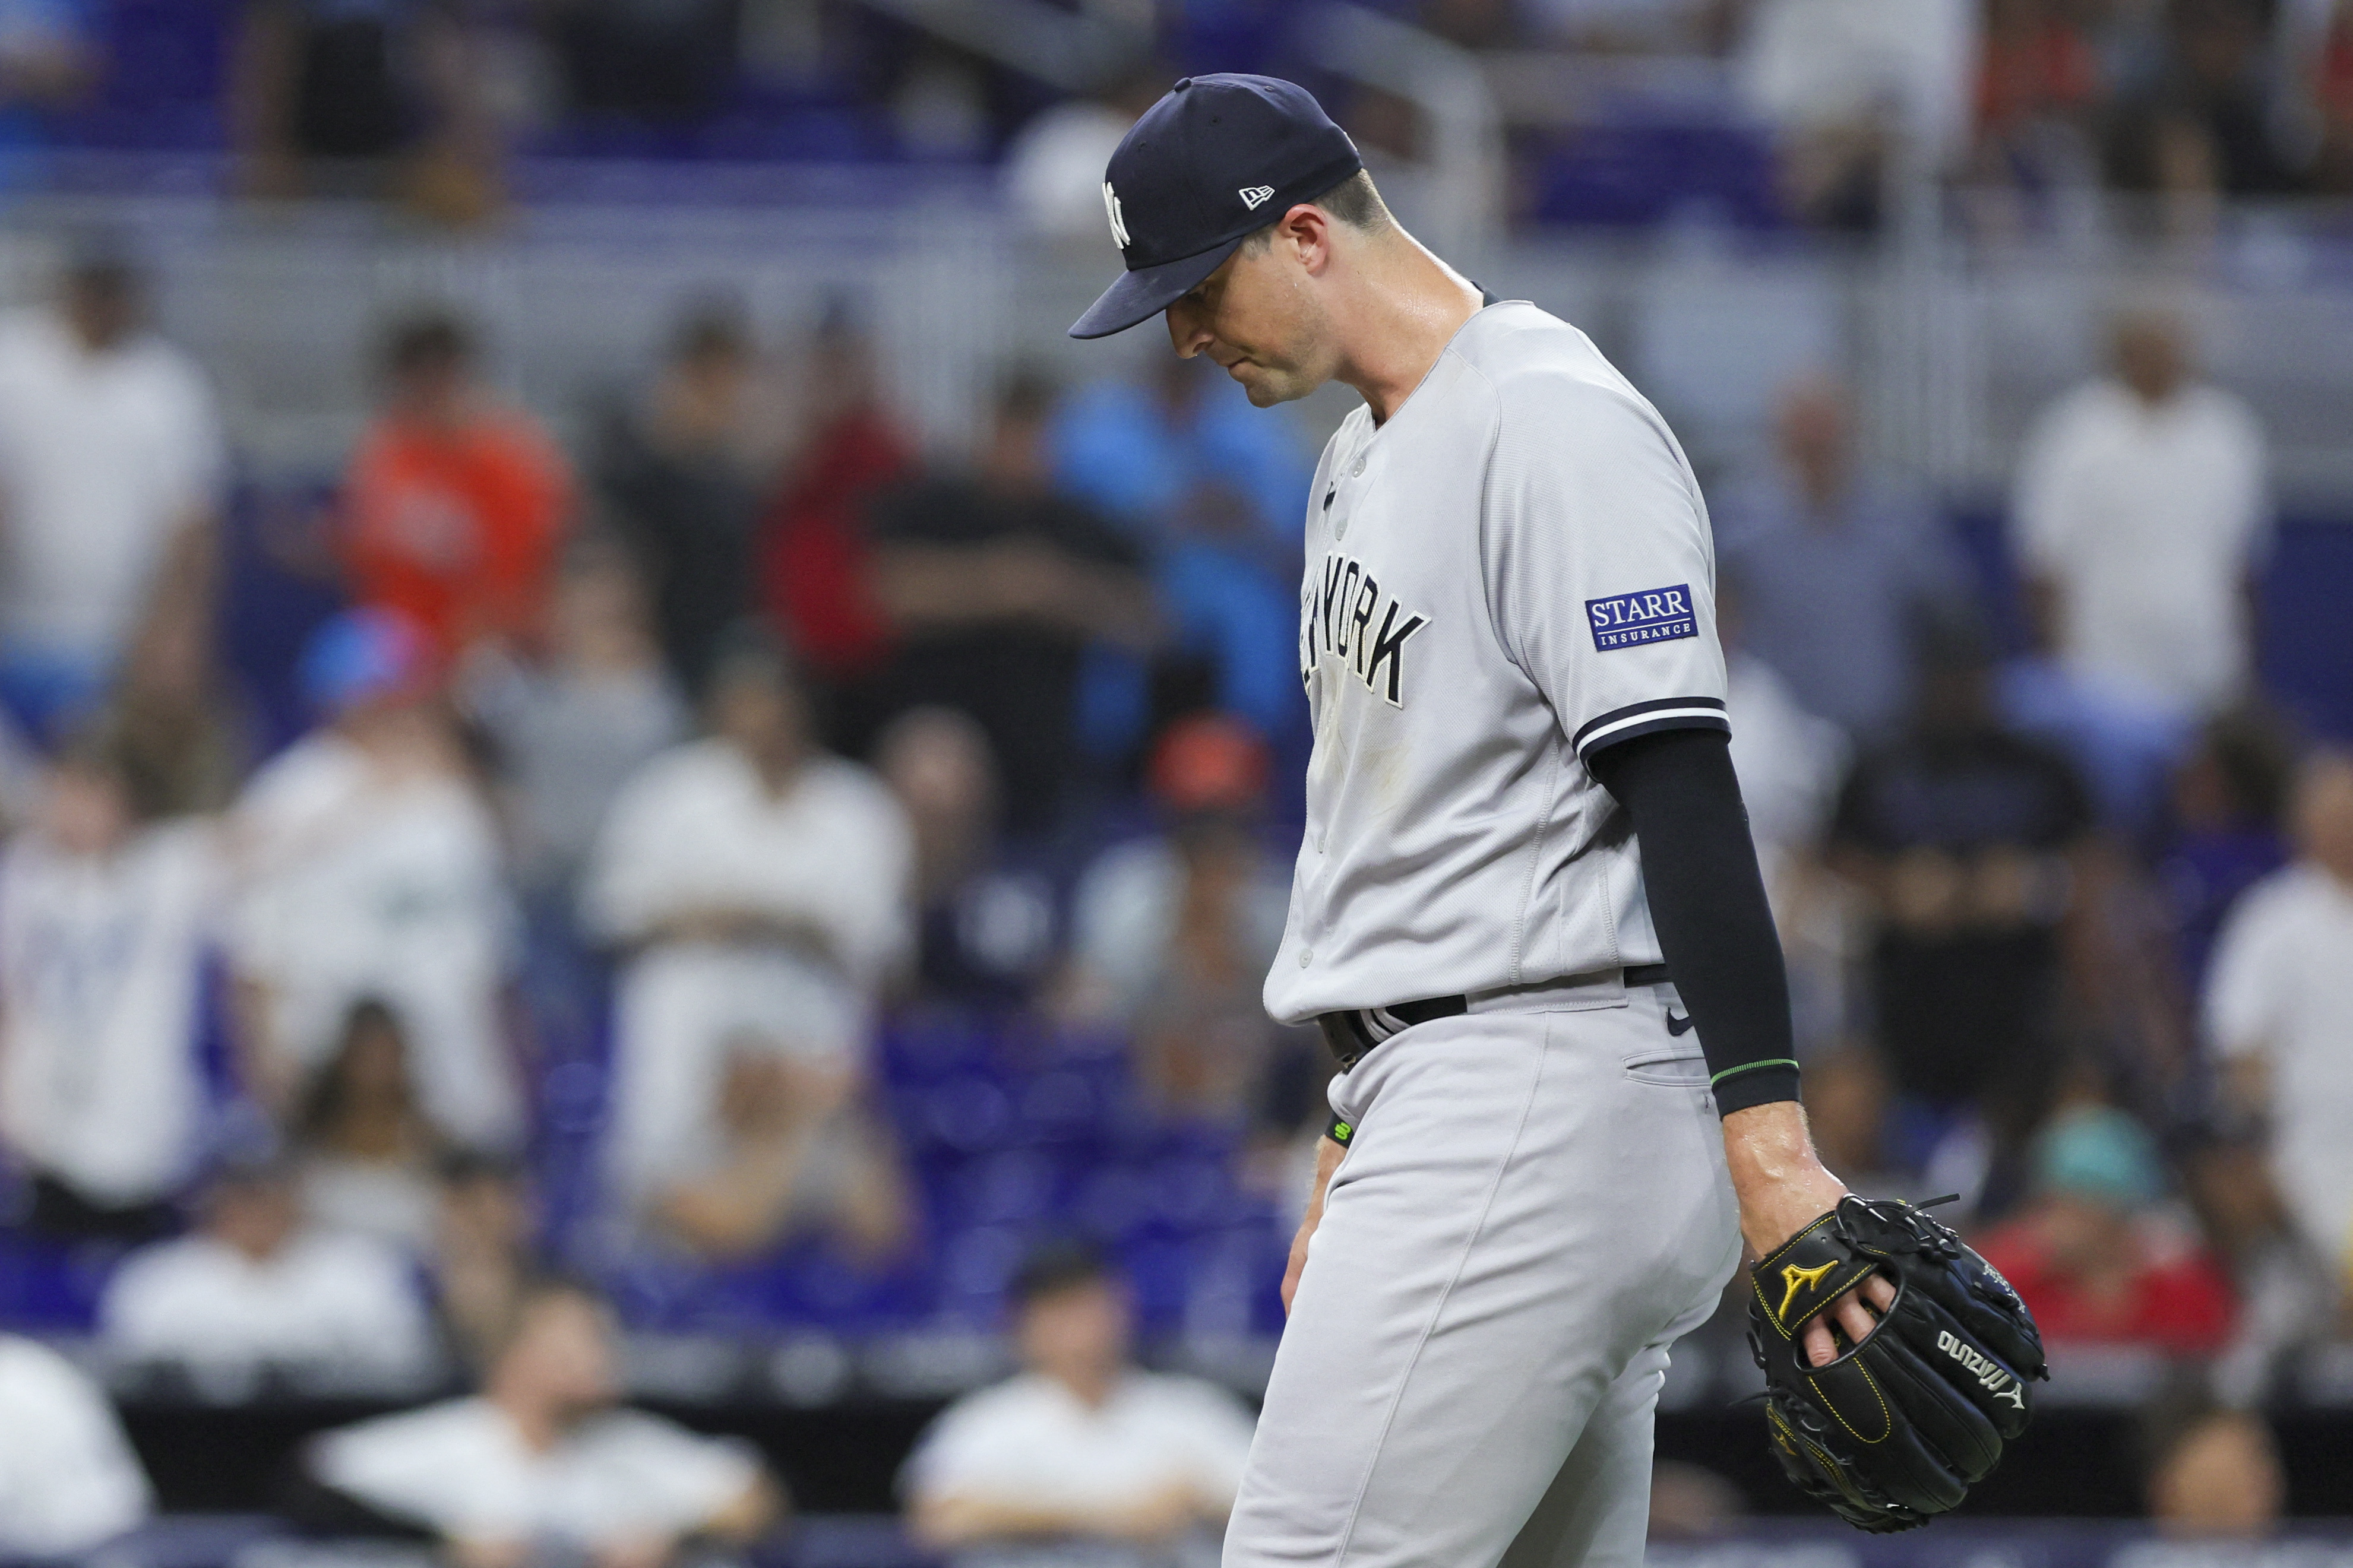 Marlins stun with 5 runs in 9th, beat Yankees 8-7 as Burger gets